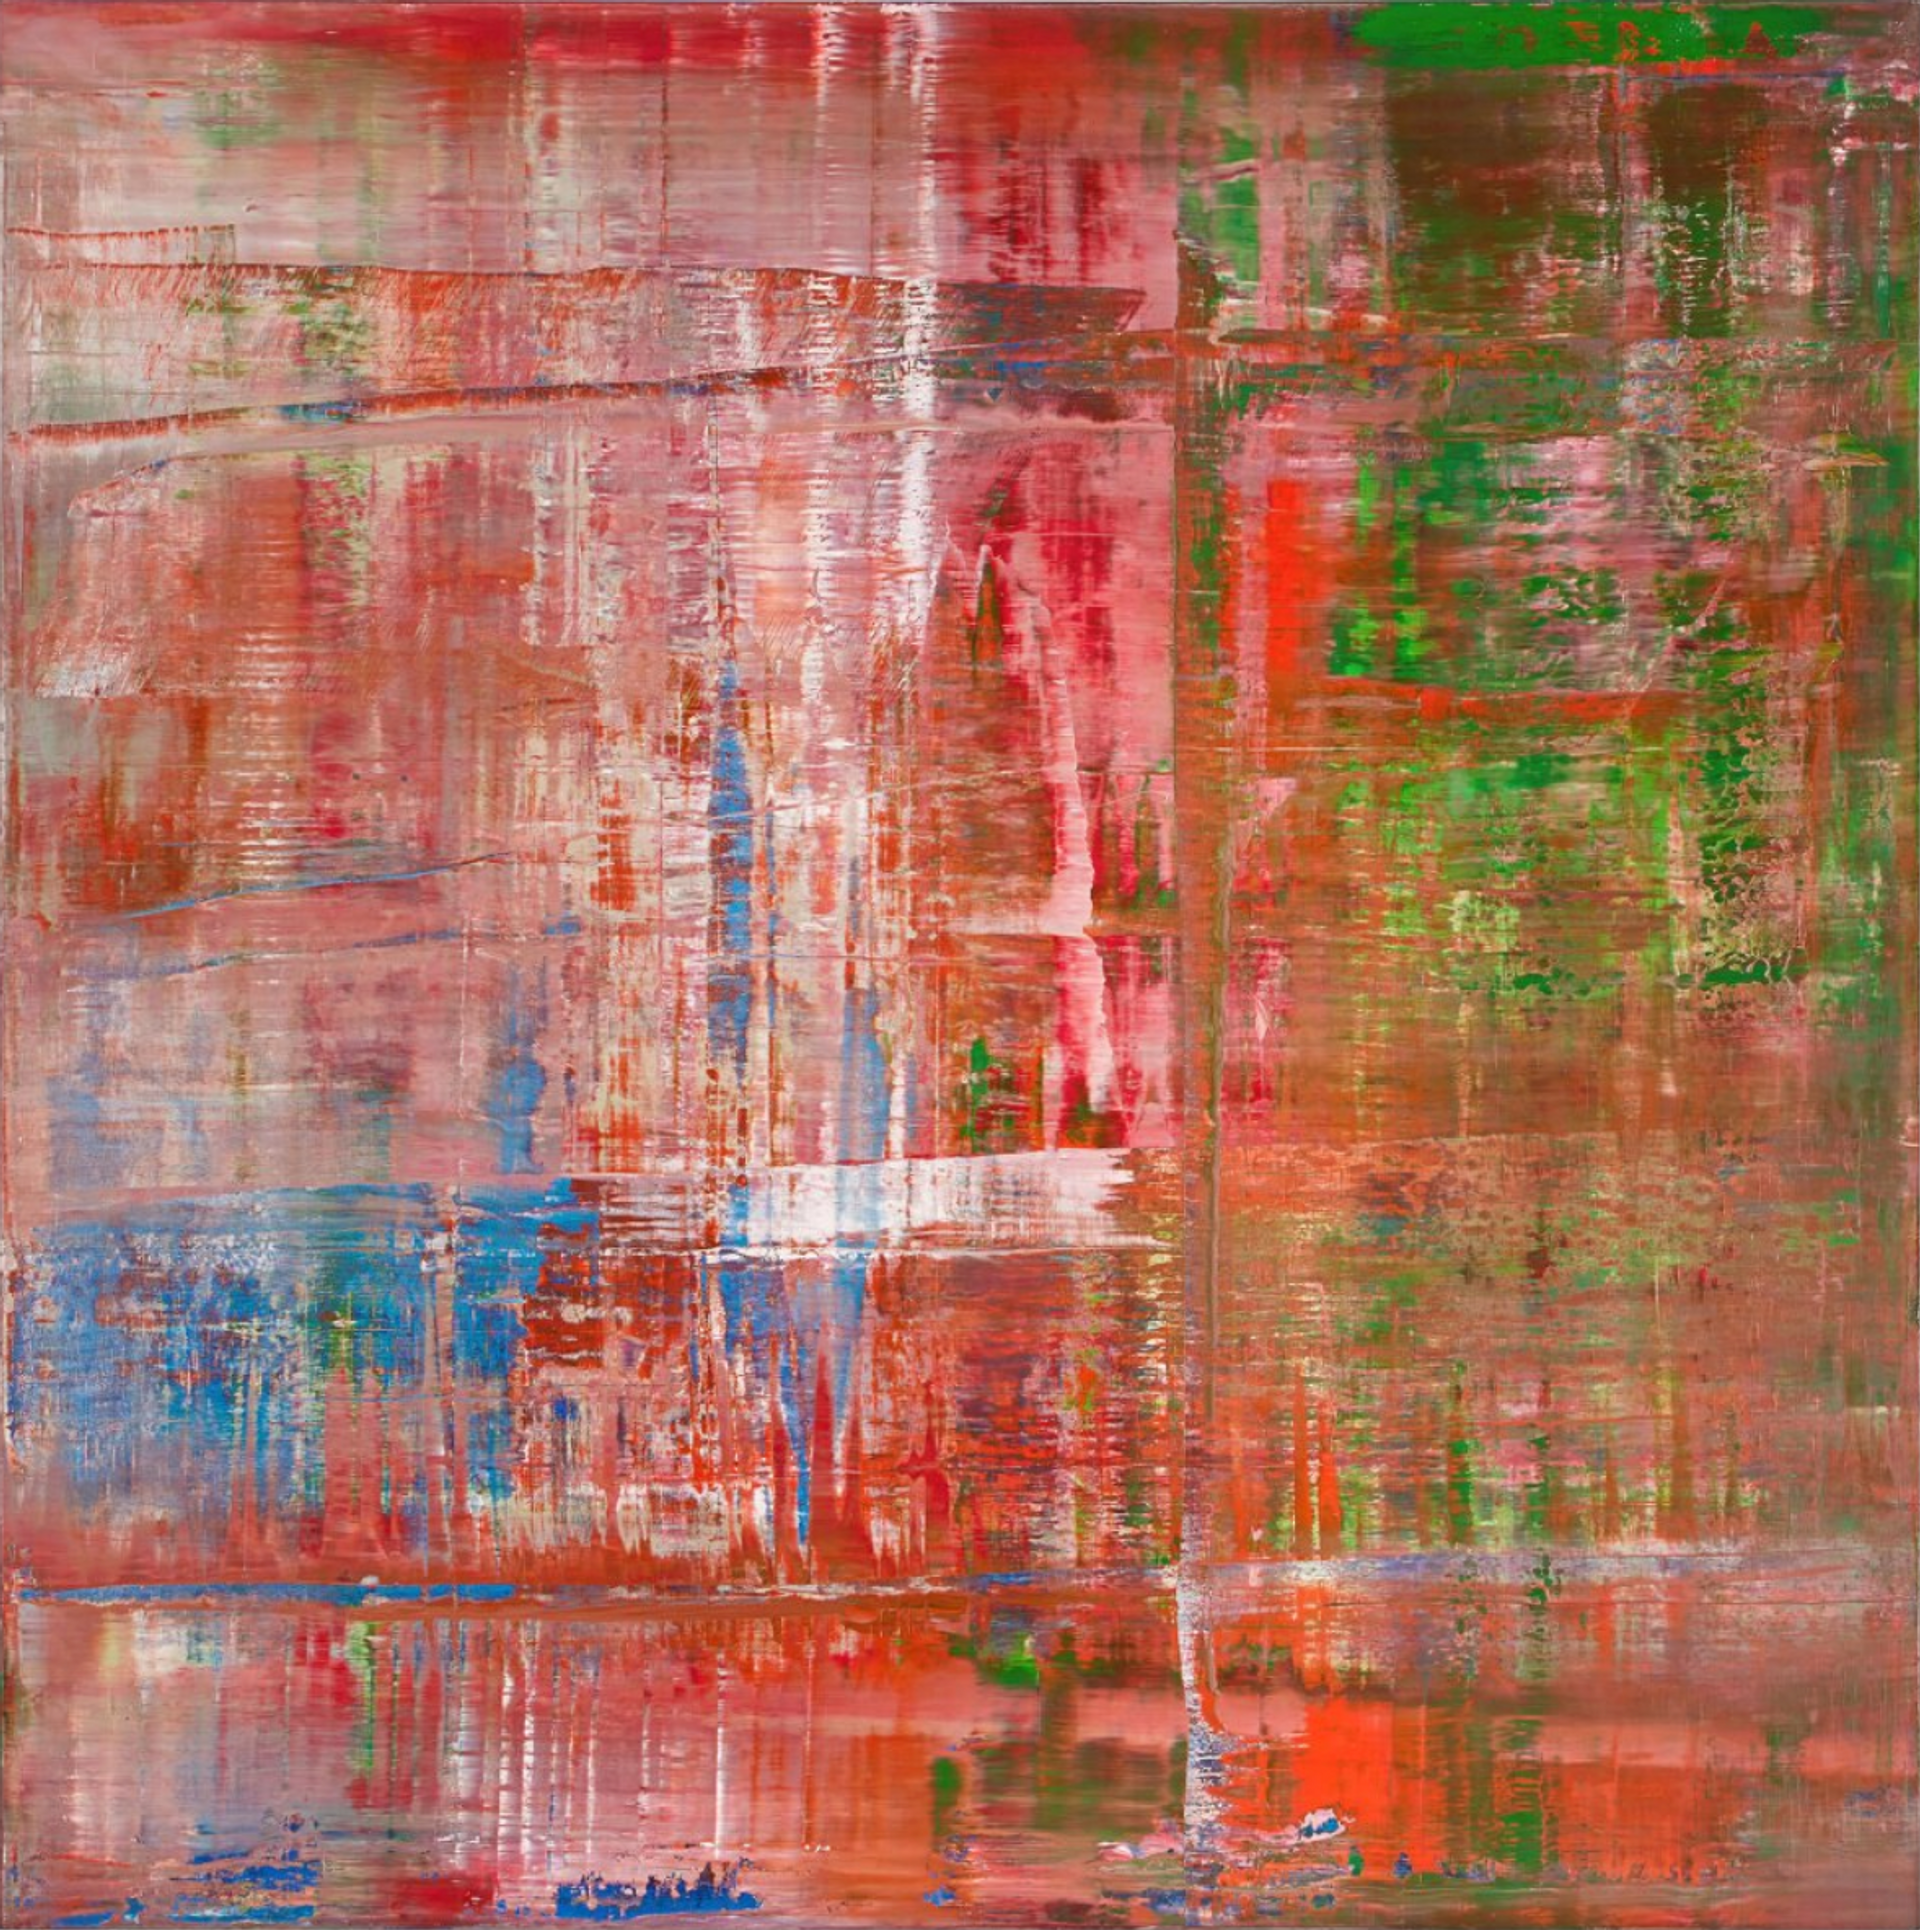 Abstract painting by Gerhard Richter, featuring dragged smears of red, orange, blue and green.